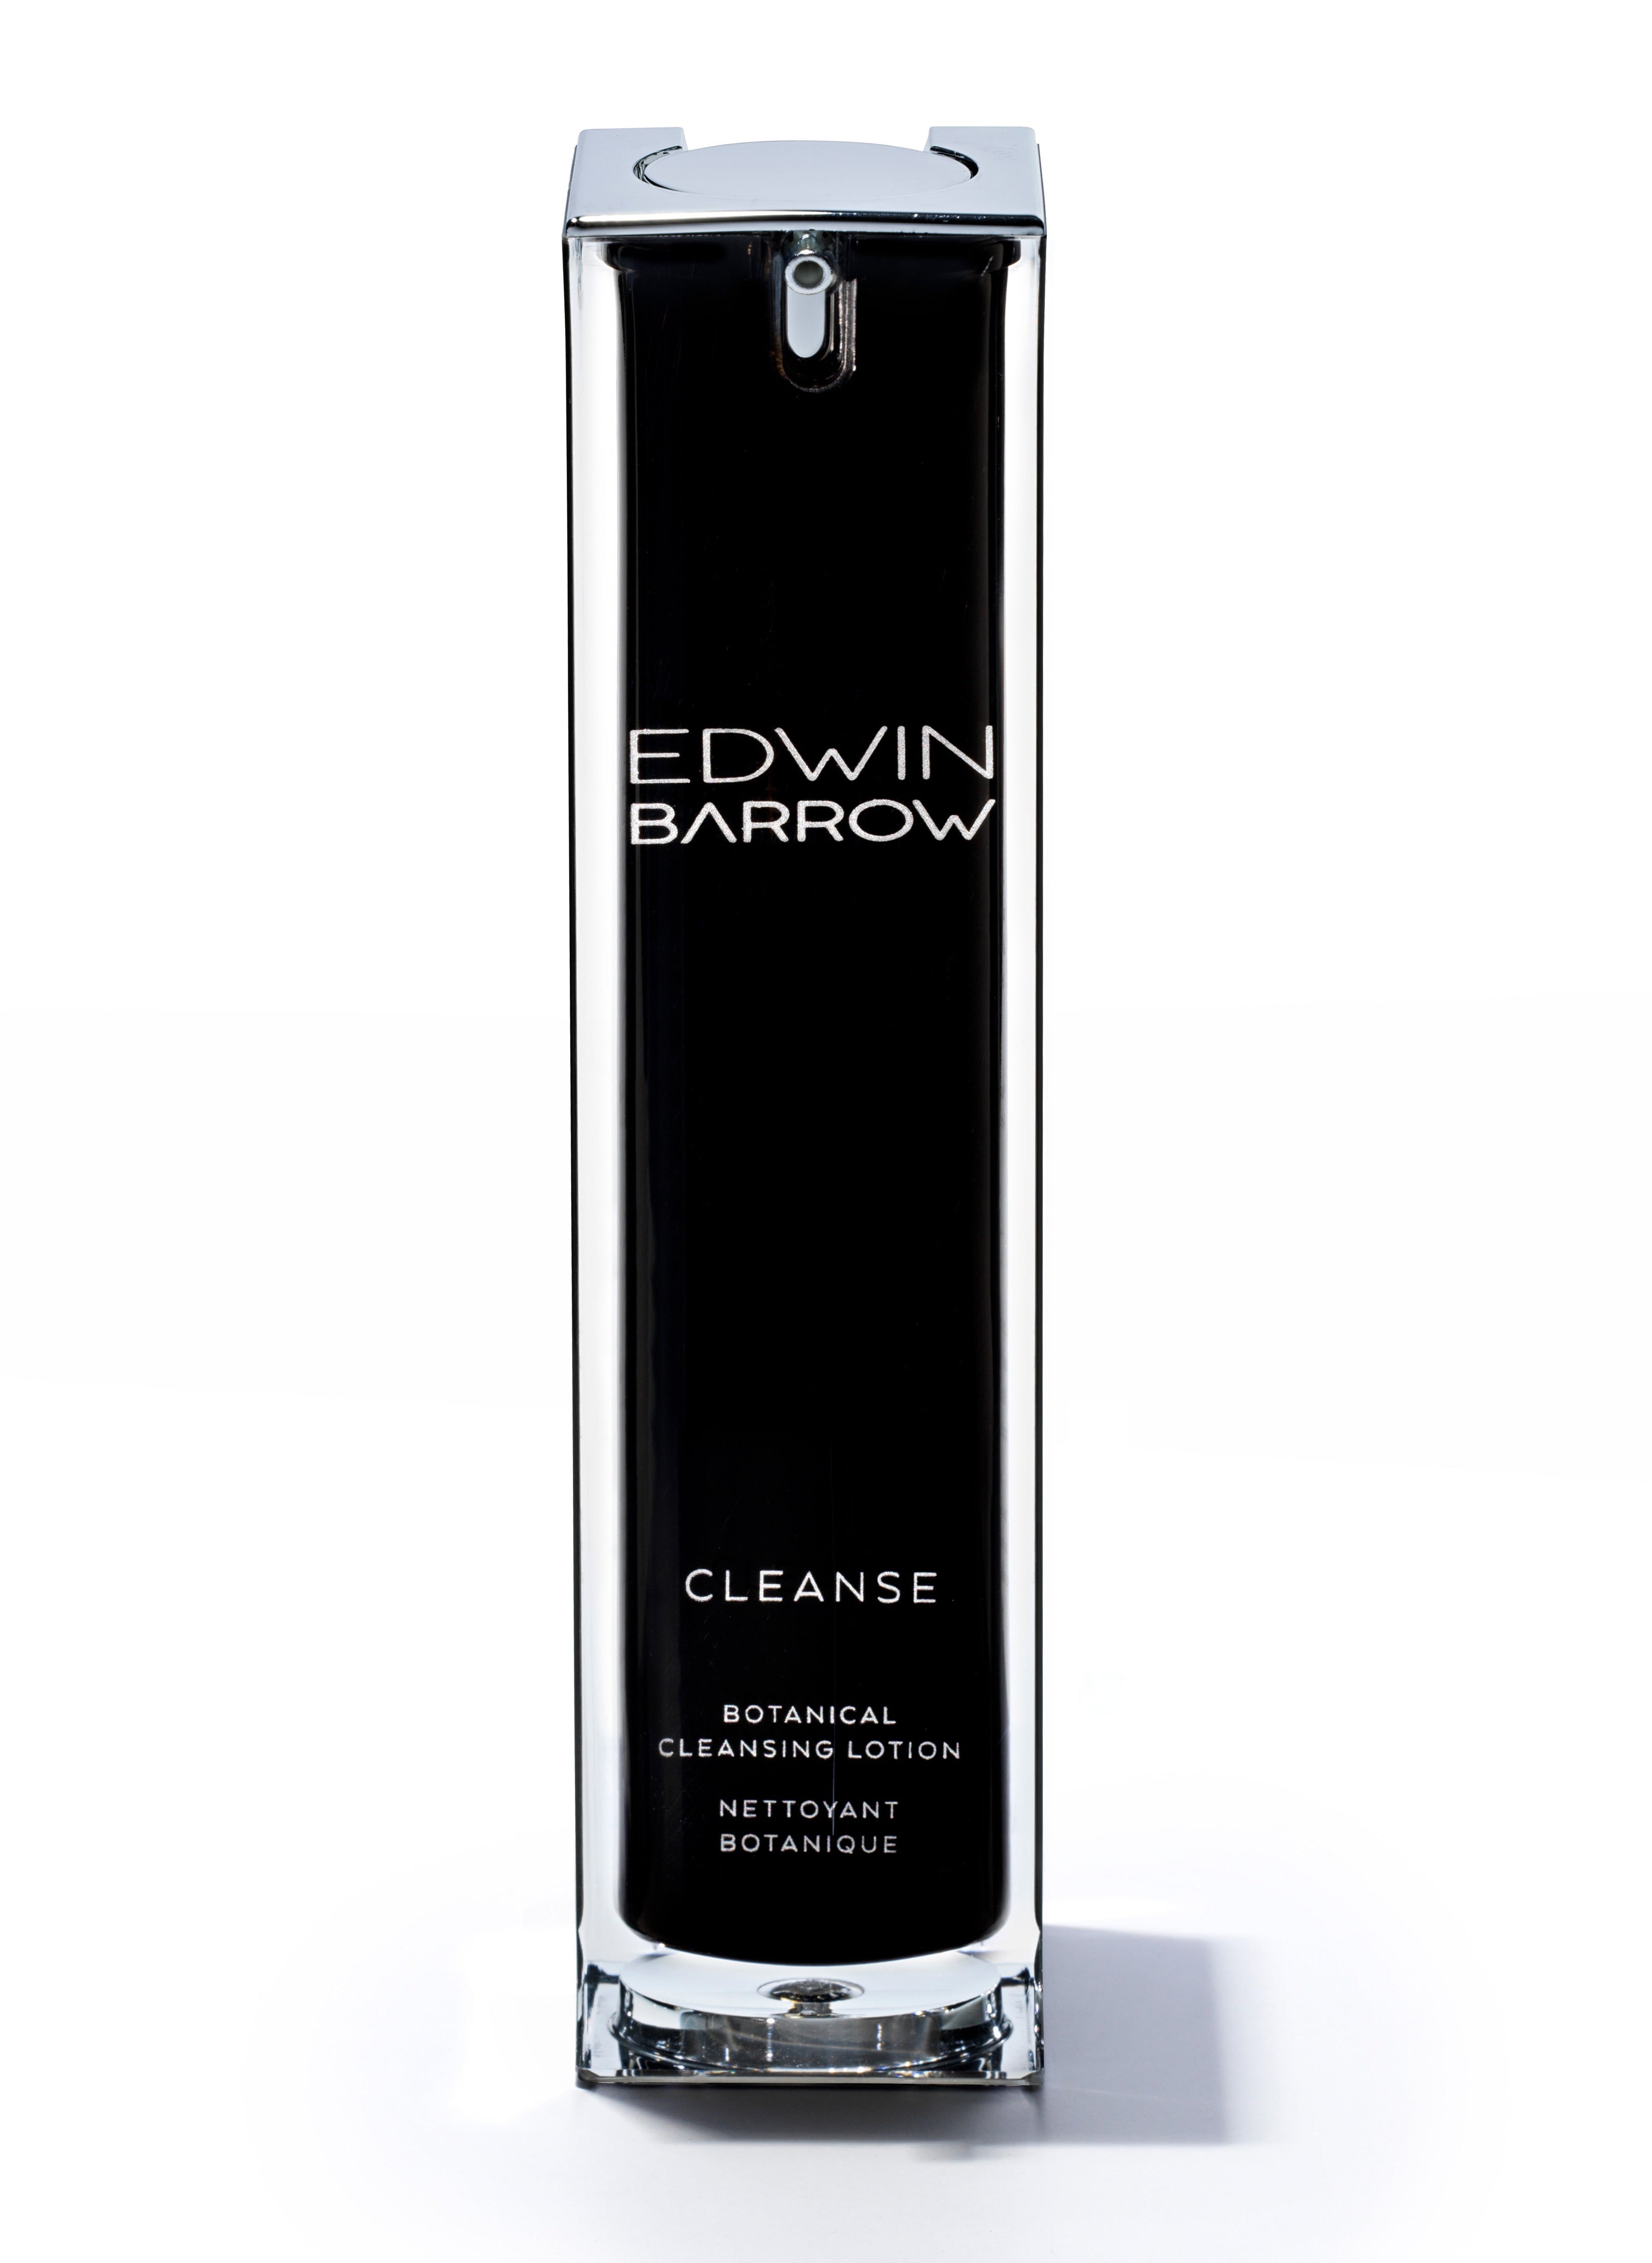 Cleanse - Botanical Cleansing Lotion EDWIN BARROW